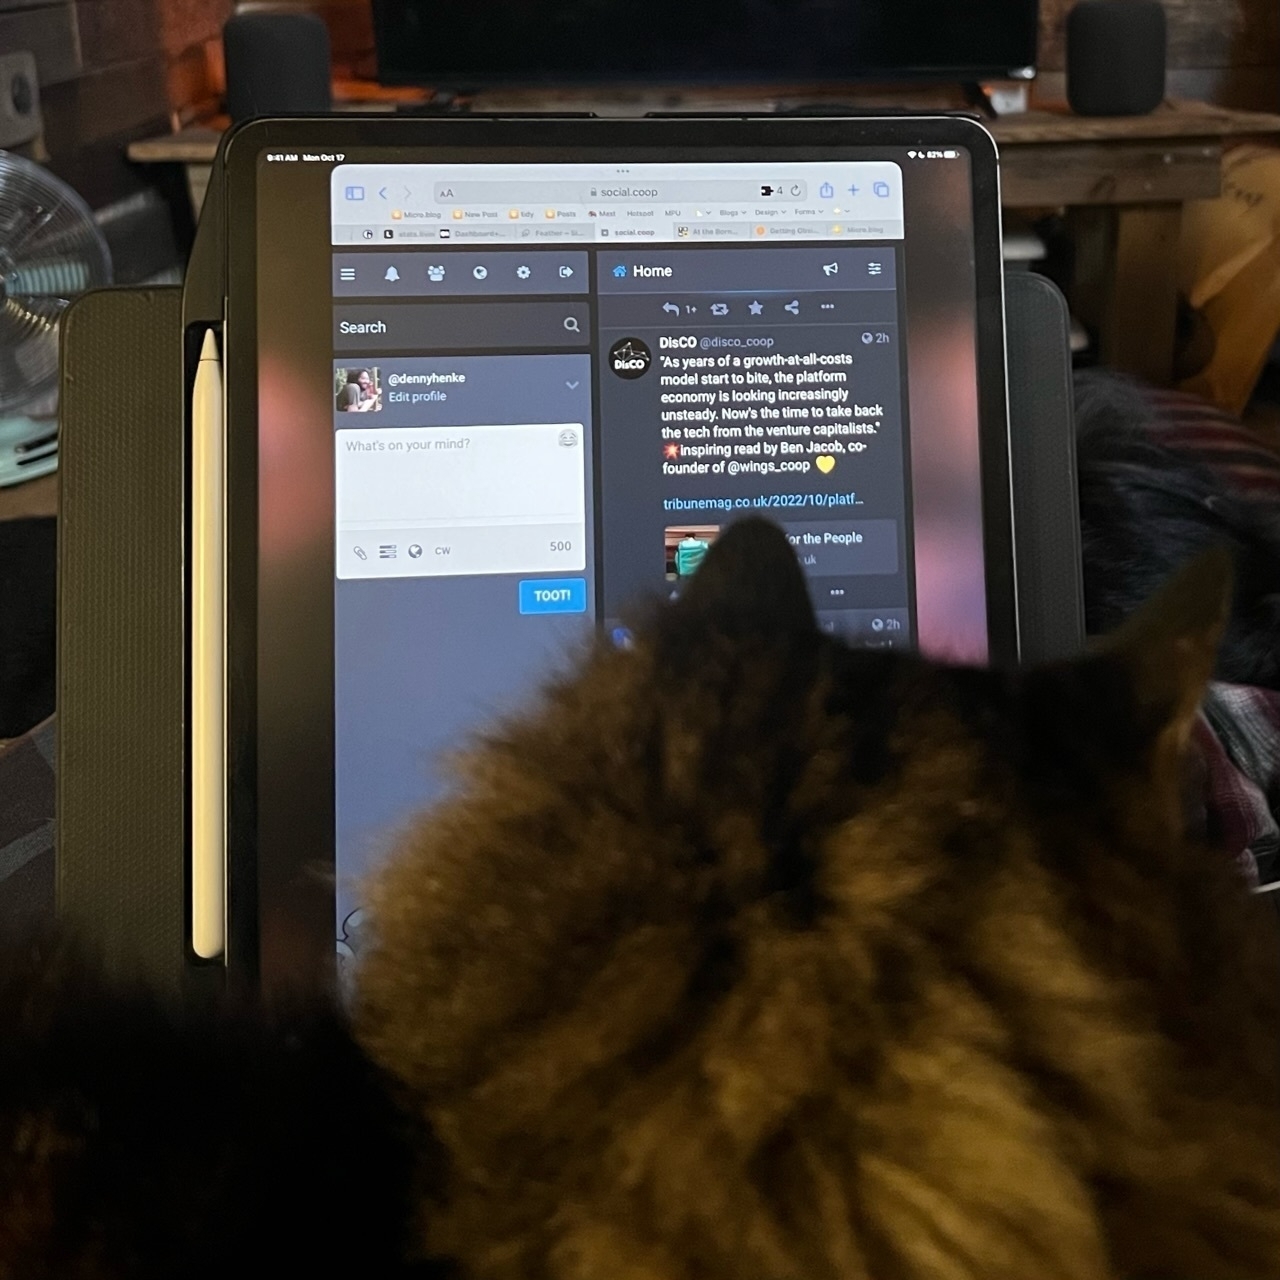 A cat in the lap, iPad propped up in portrait orientation behind her